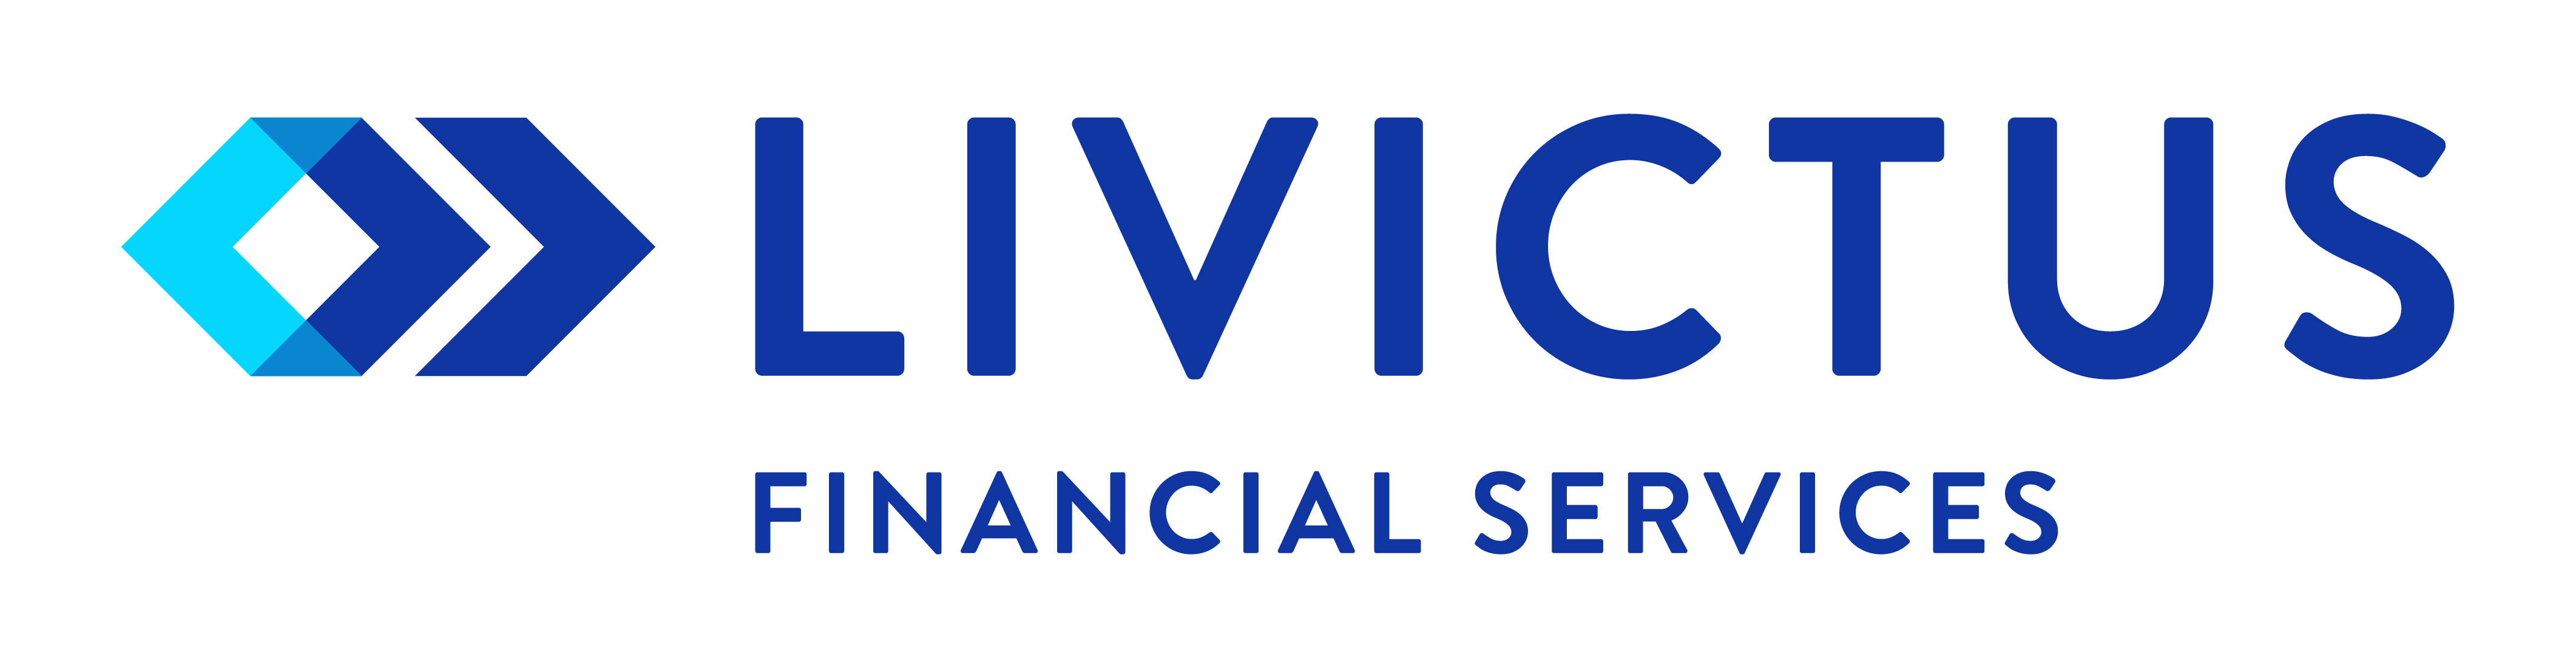 The Nathan Agencies Become Livictus Financial Services